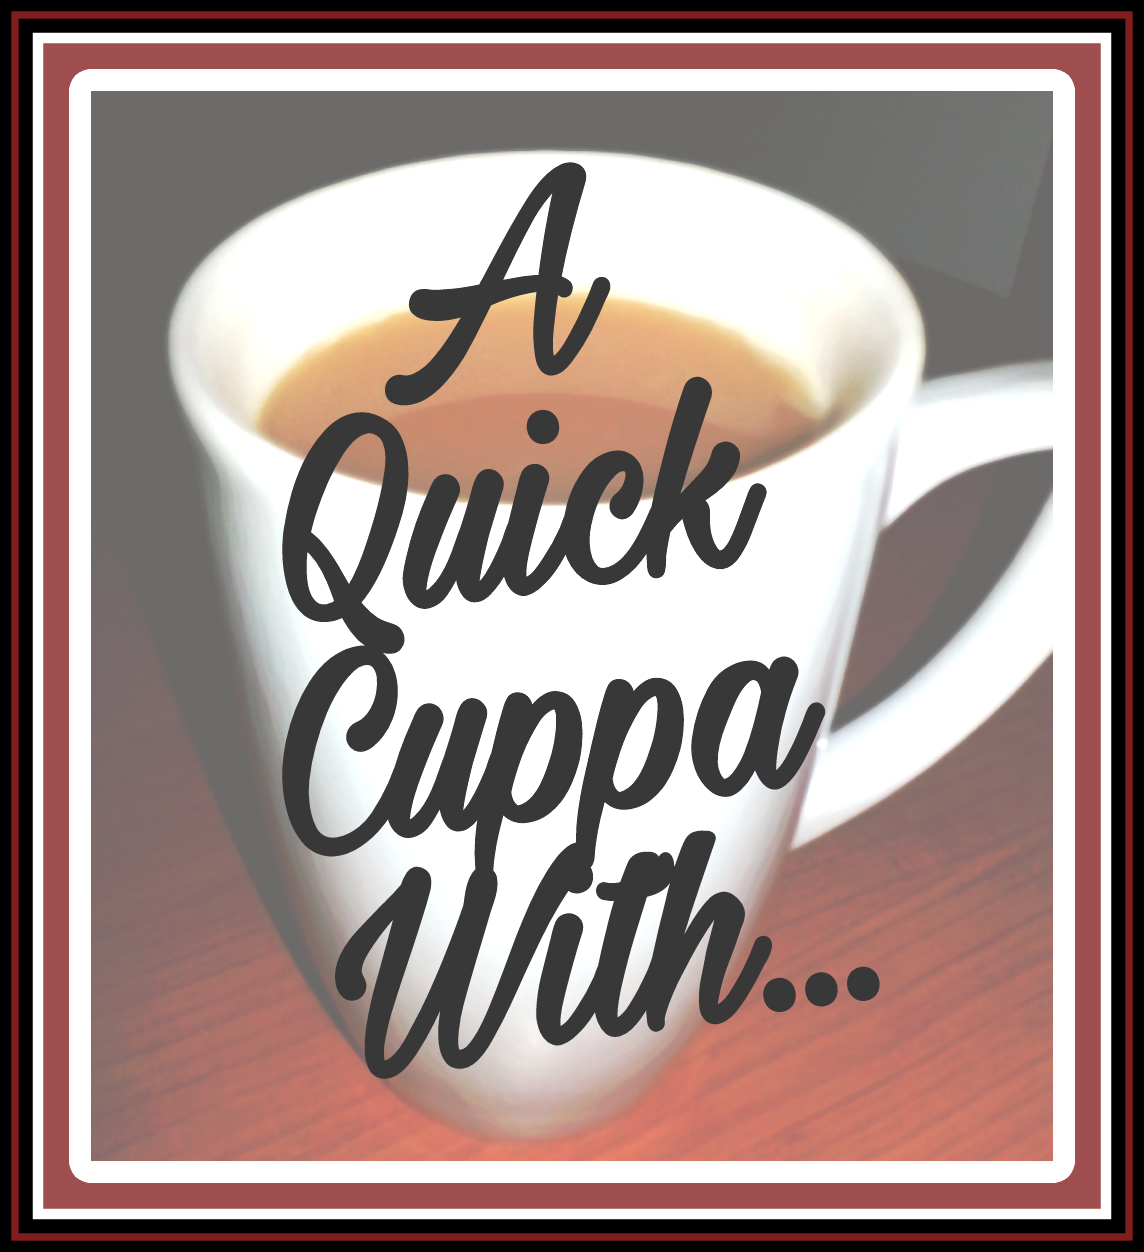 A Quick Cuppa With, The Opinionated Dad, blogger, interview, Living Life Our Way, guest series, Q and A